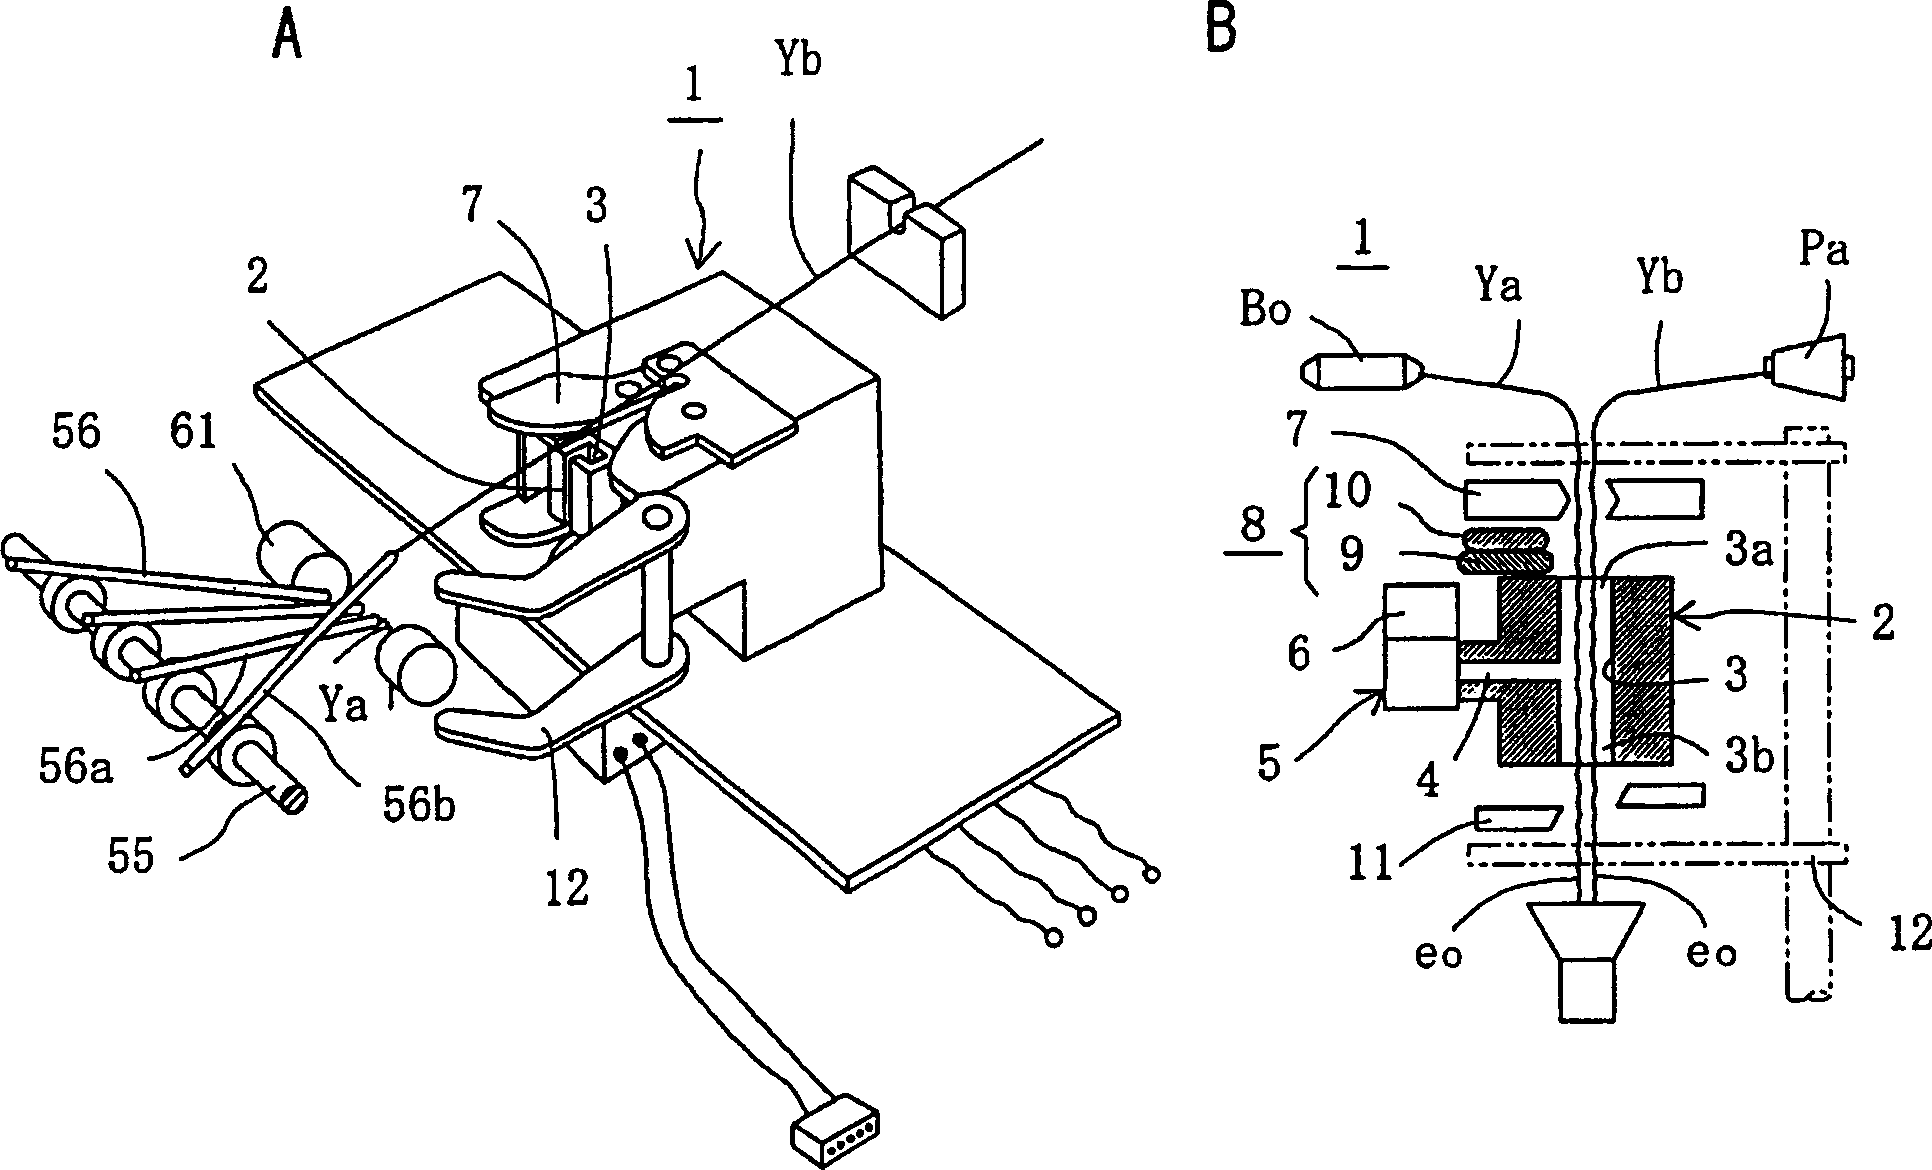 Yarn joining device and handy splicer